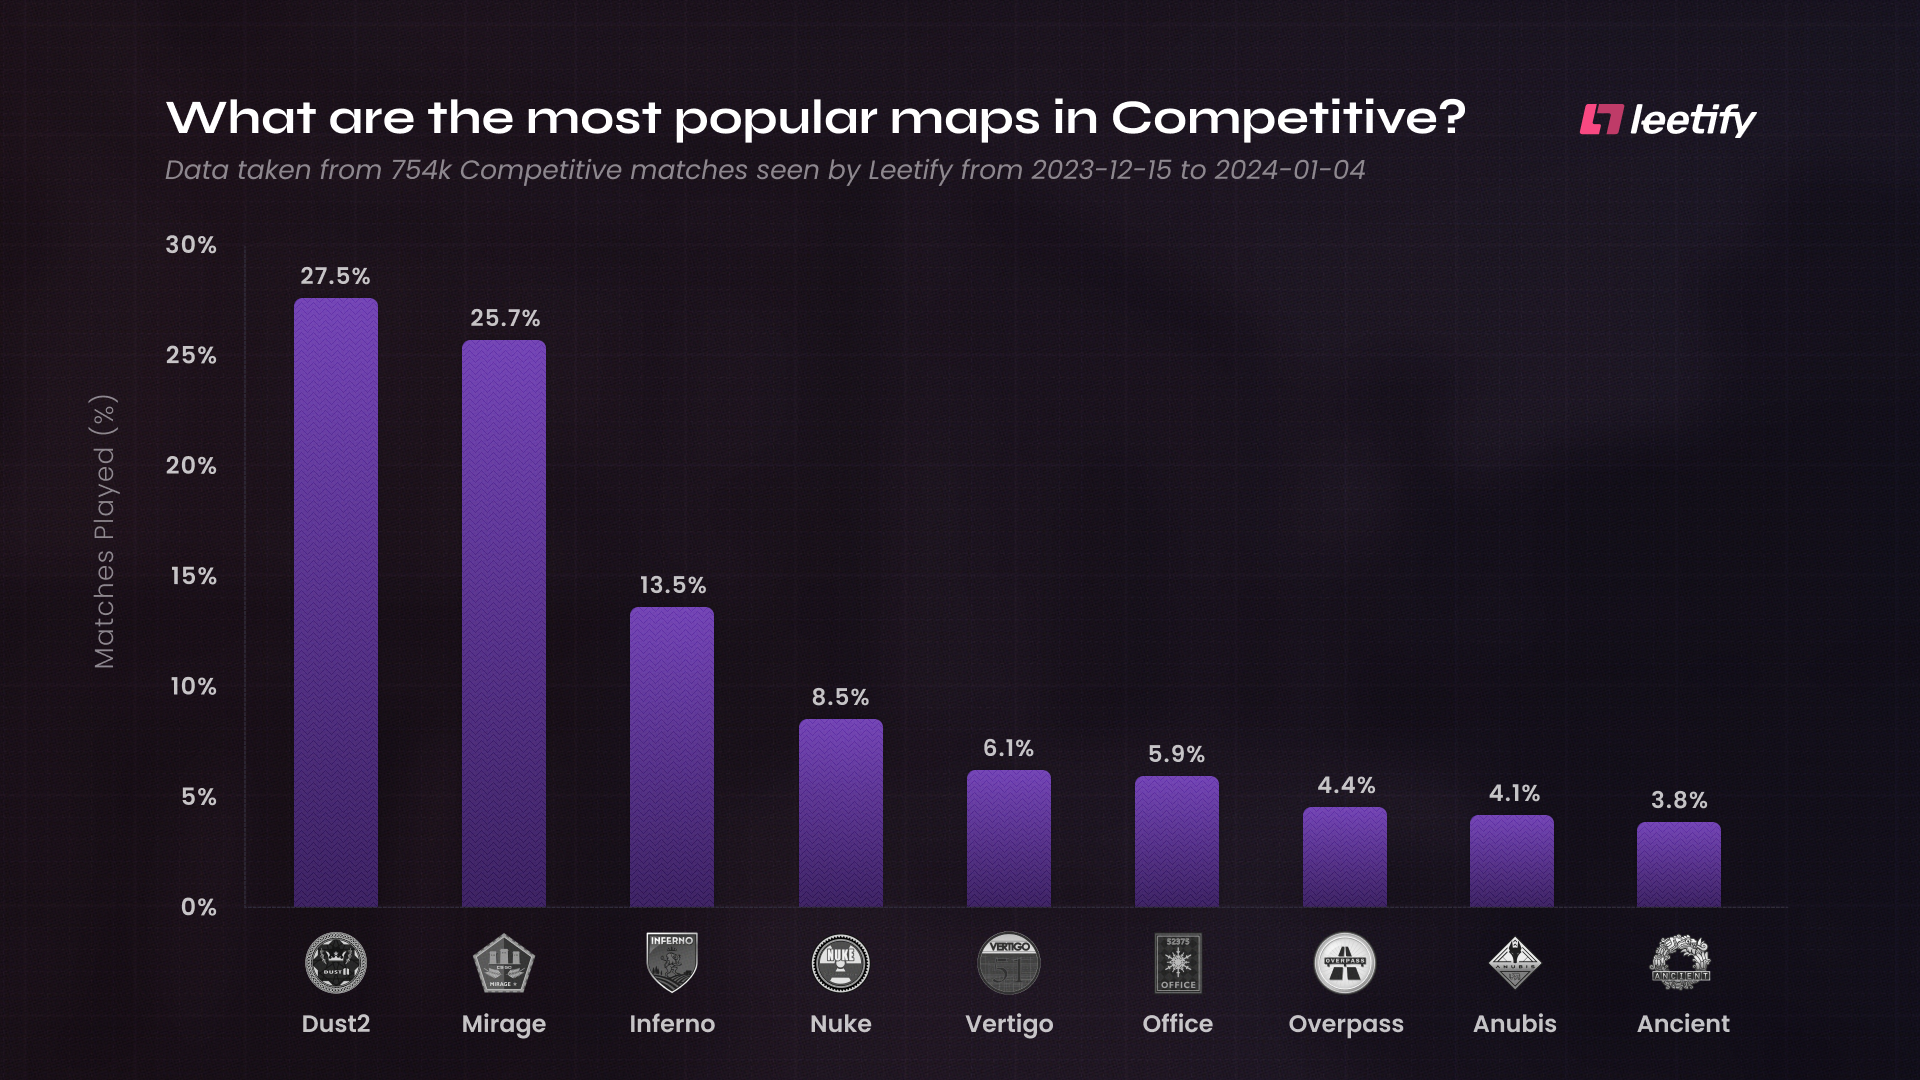 'Competitive' is more popular than you think